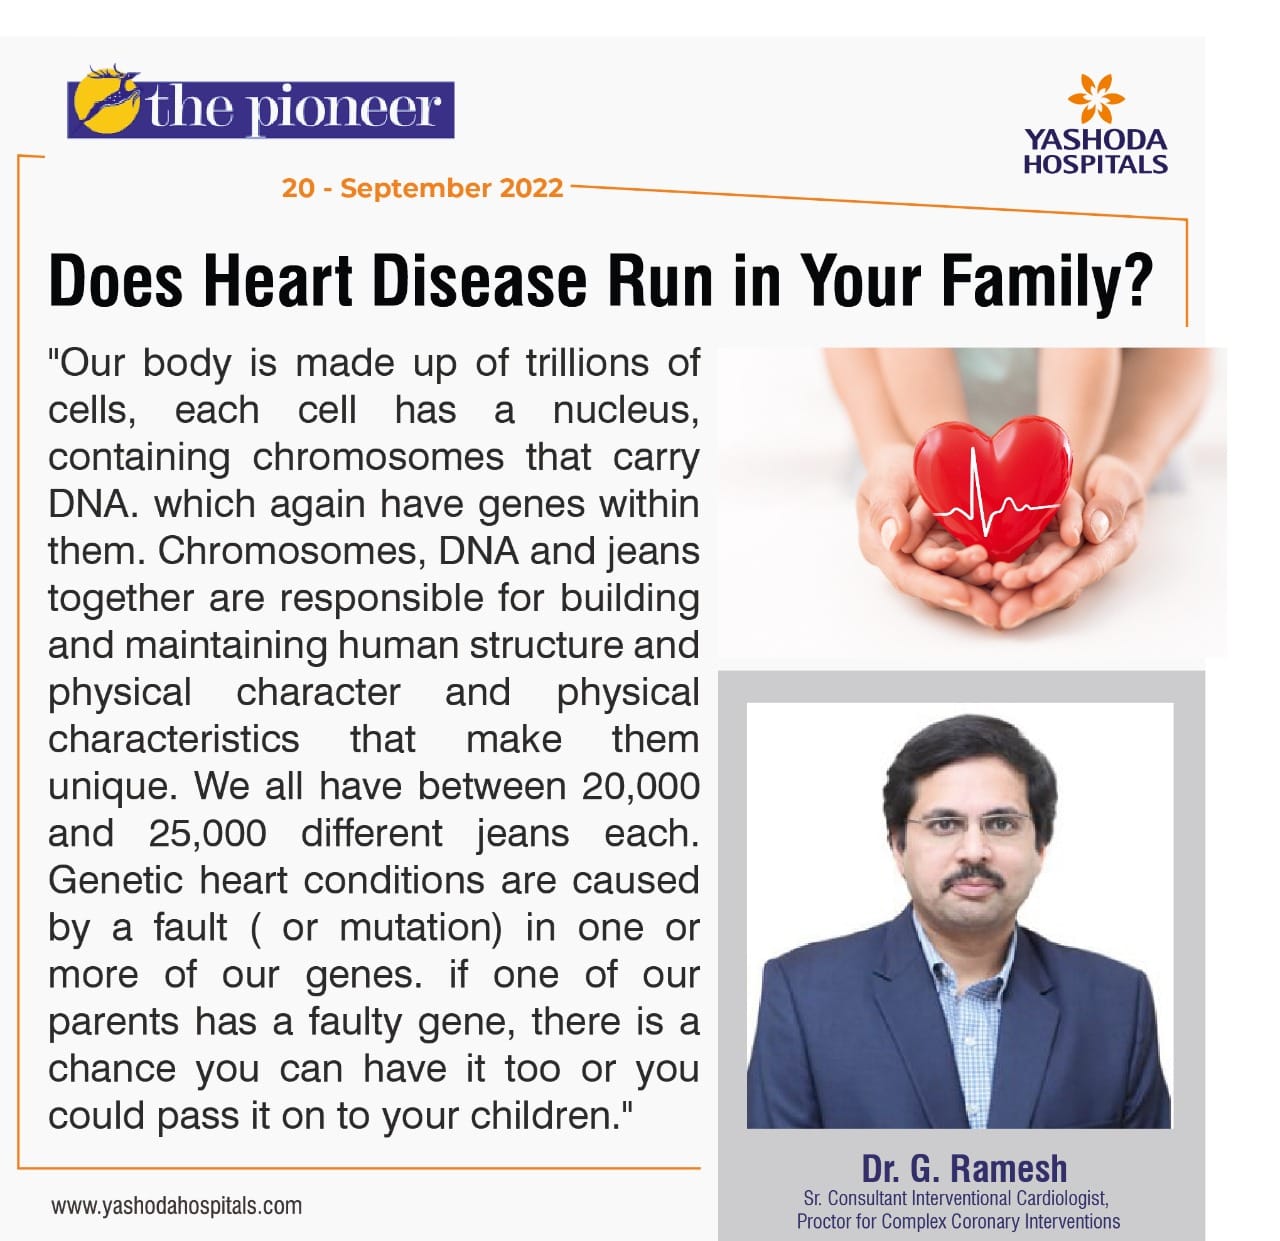 Does Heart Disease run in your family?